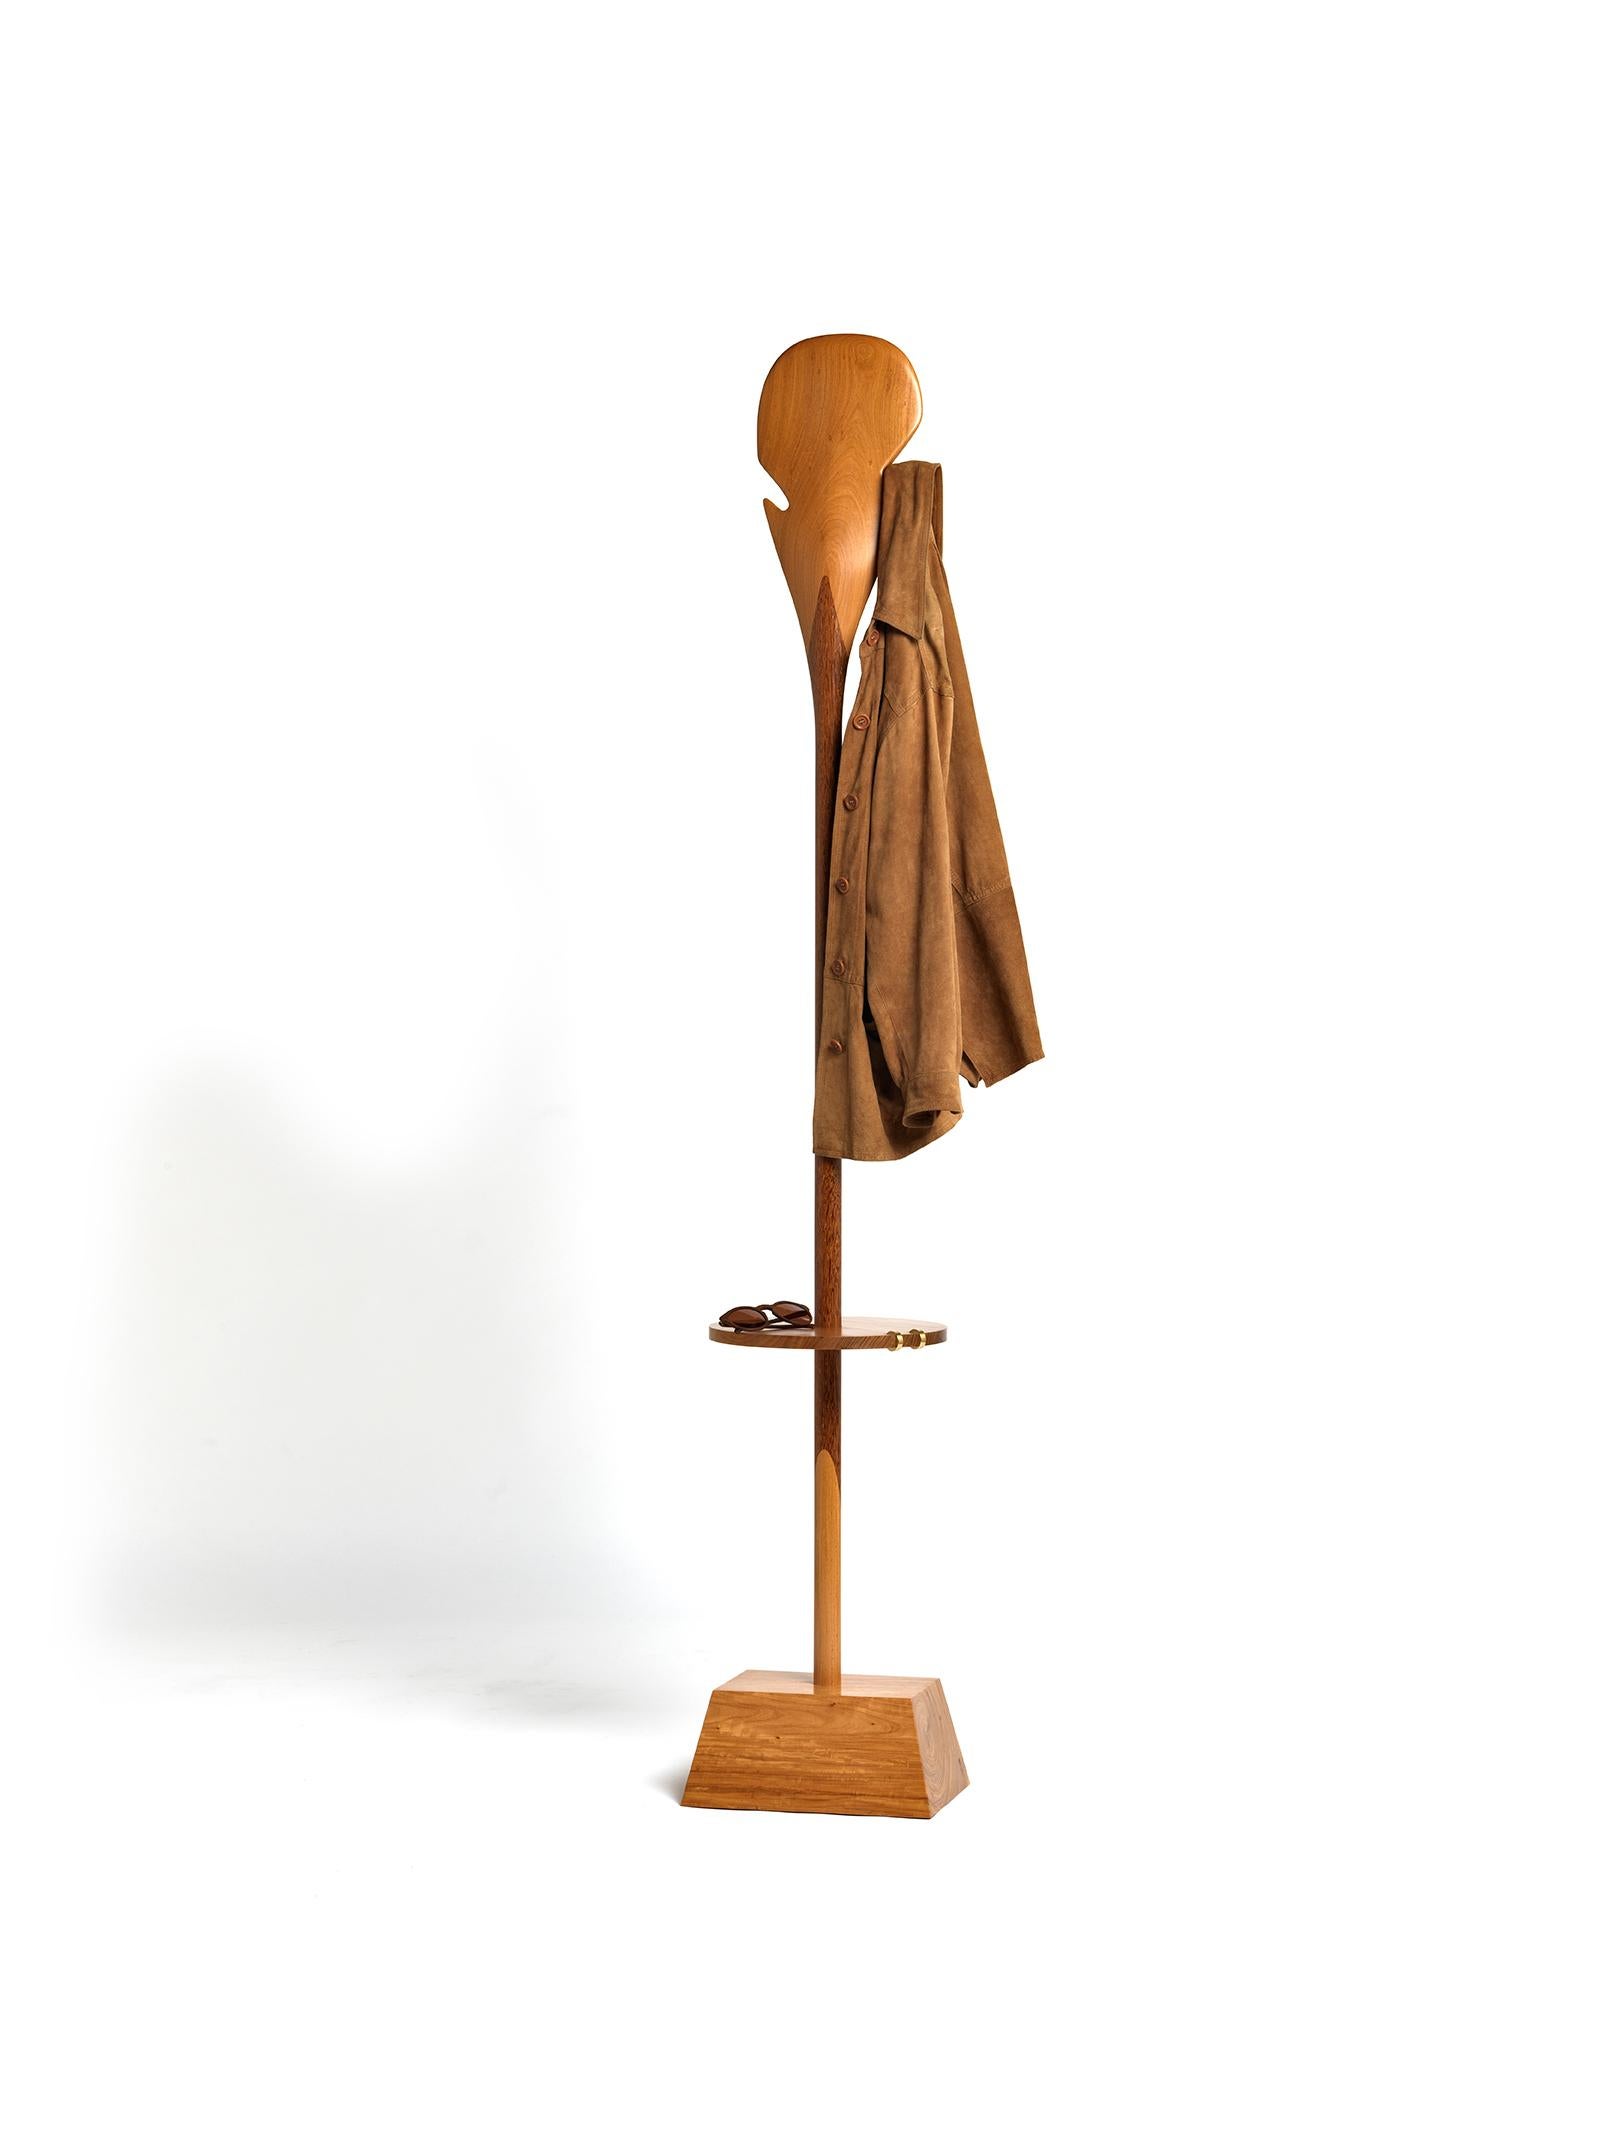 This hat stand or coat rack resembles a wooden paddle. And to produce it by hand, shaping the curves on the wood, is something very pleasing to the woodworkers. The request of a client to develop a hat stand to a hotel by the beach gave the spark